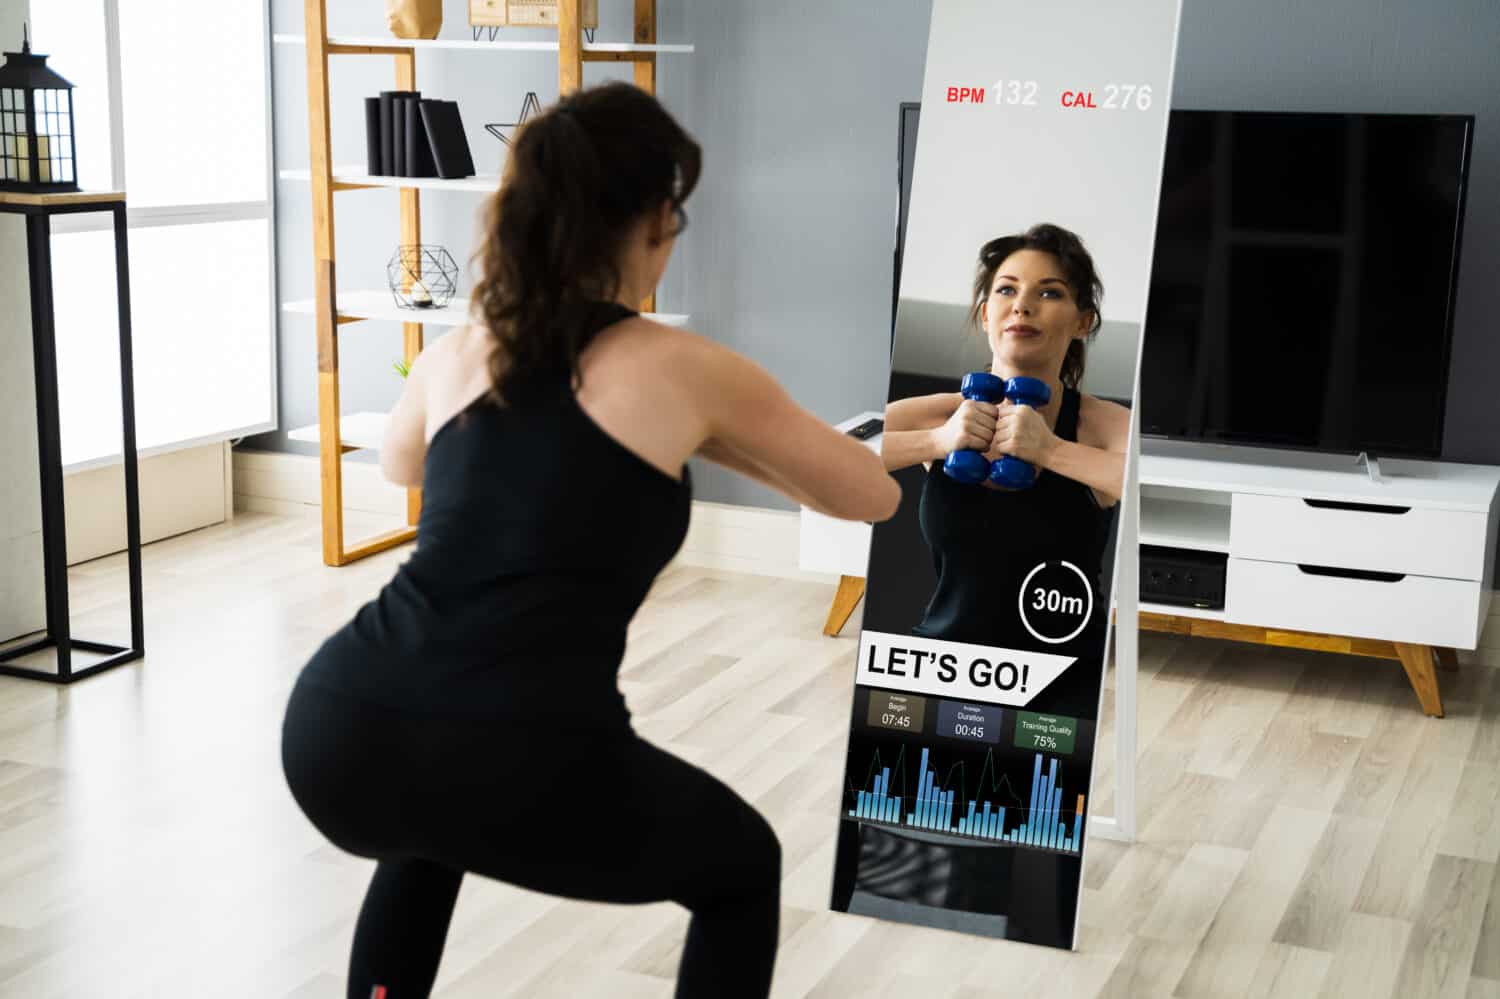 Online Fitness Exercise At Home Using Smart Mirror